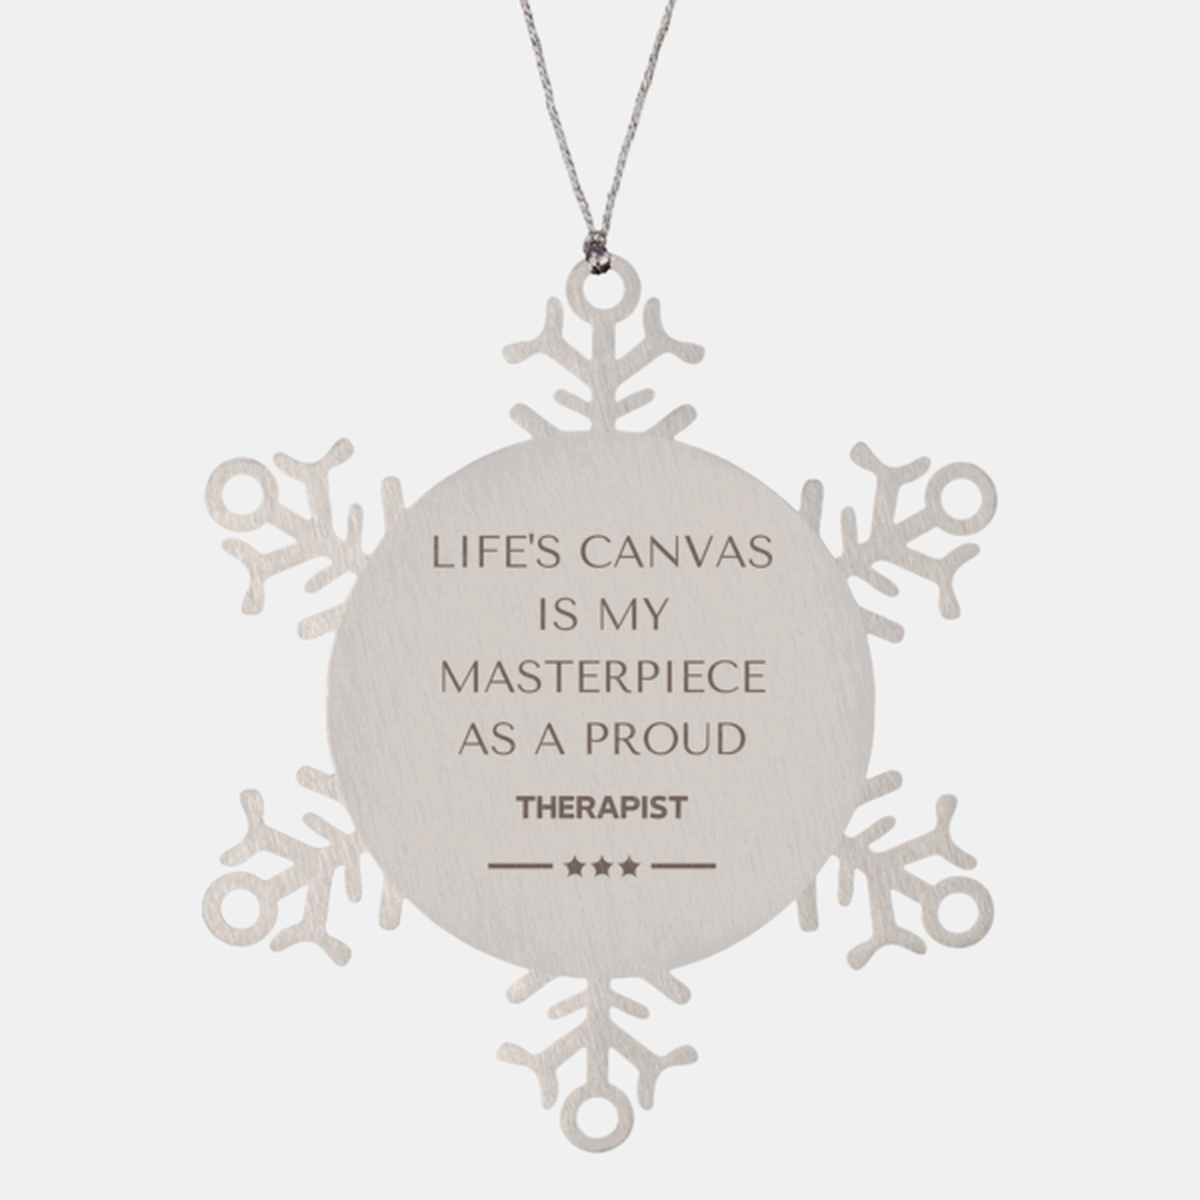 Proud Therapist Gifts, Life's canvas is my masterpiece, Epic Birthday Christmas Unique Snowflake Ornament For Therapist, Coworkers, Men, Women, Friends